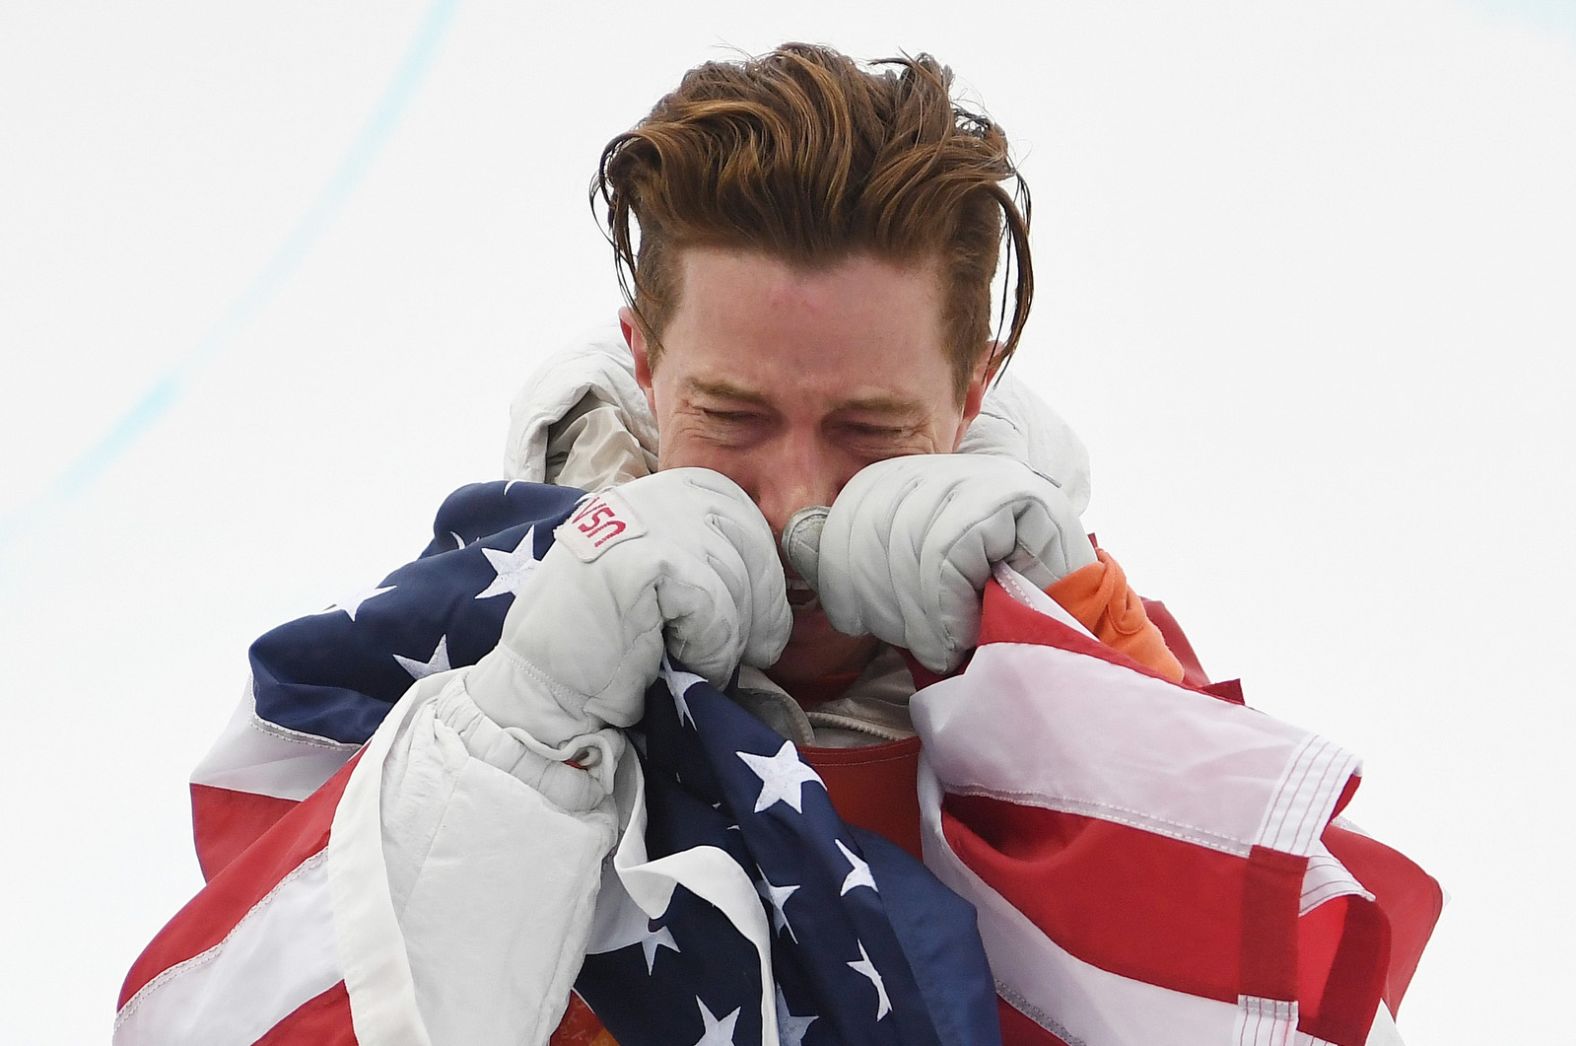 White breaks out into tears after winning the halfpipe at the 2018 Winter Olympics in South Korea. White trailed Japan's Ayumu Hirano going into his last run — the final run of the entire competition. But with all the pressure on him, <a href="https://www.cnn.com/2018/02/14/sport/cnn-photos-shaun-white-gold-medal-moment/index.html" target="_blank">White came through with a near-perfect score of 98.50.</a> It was his third gold in four Olympics.